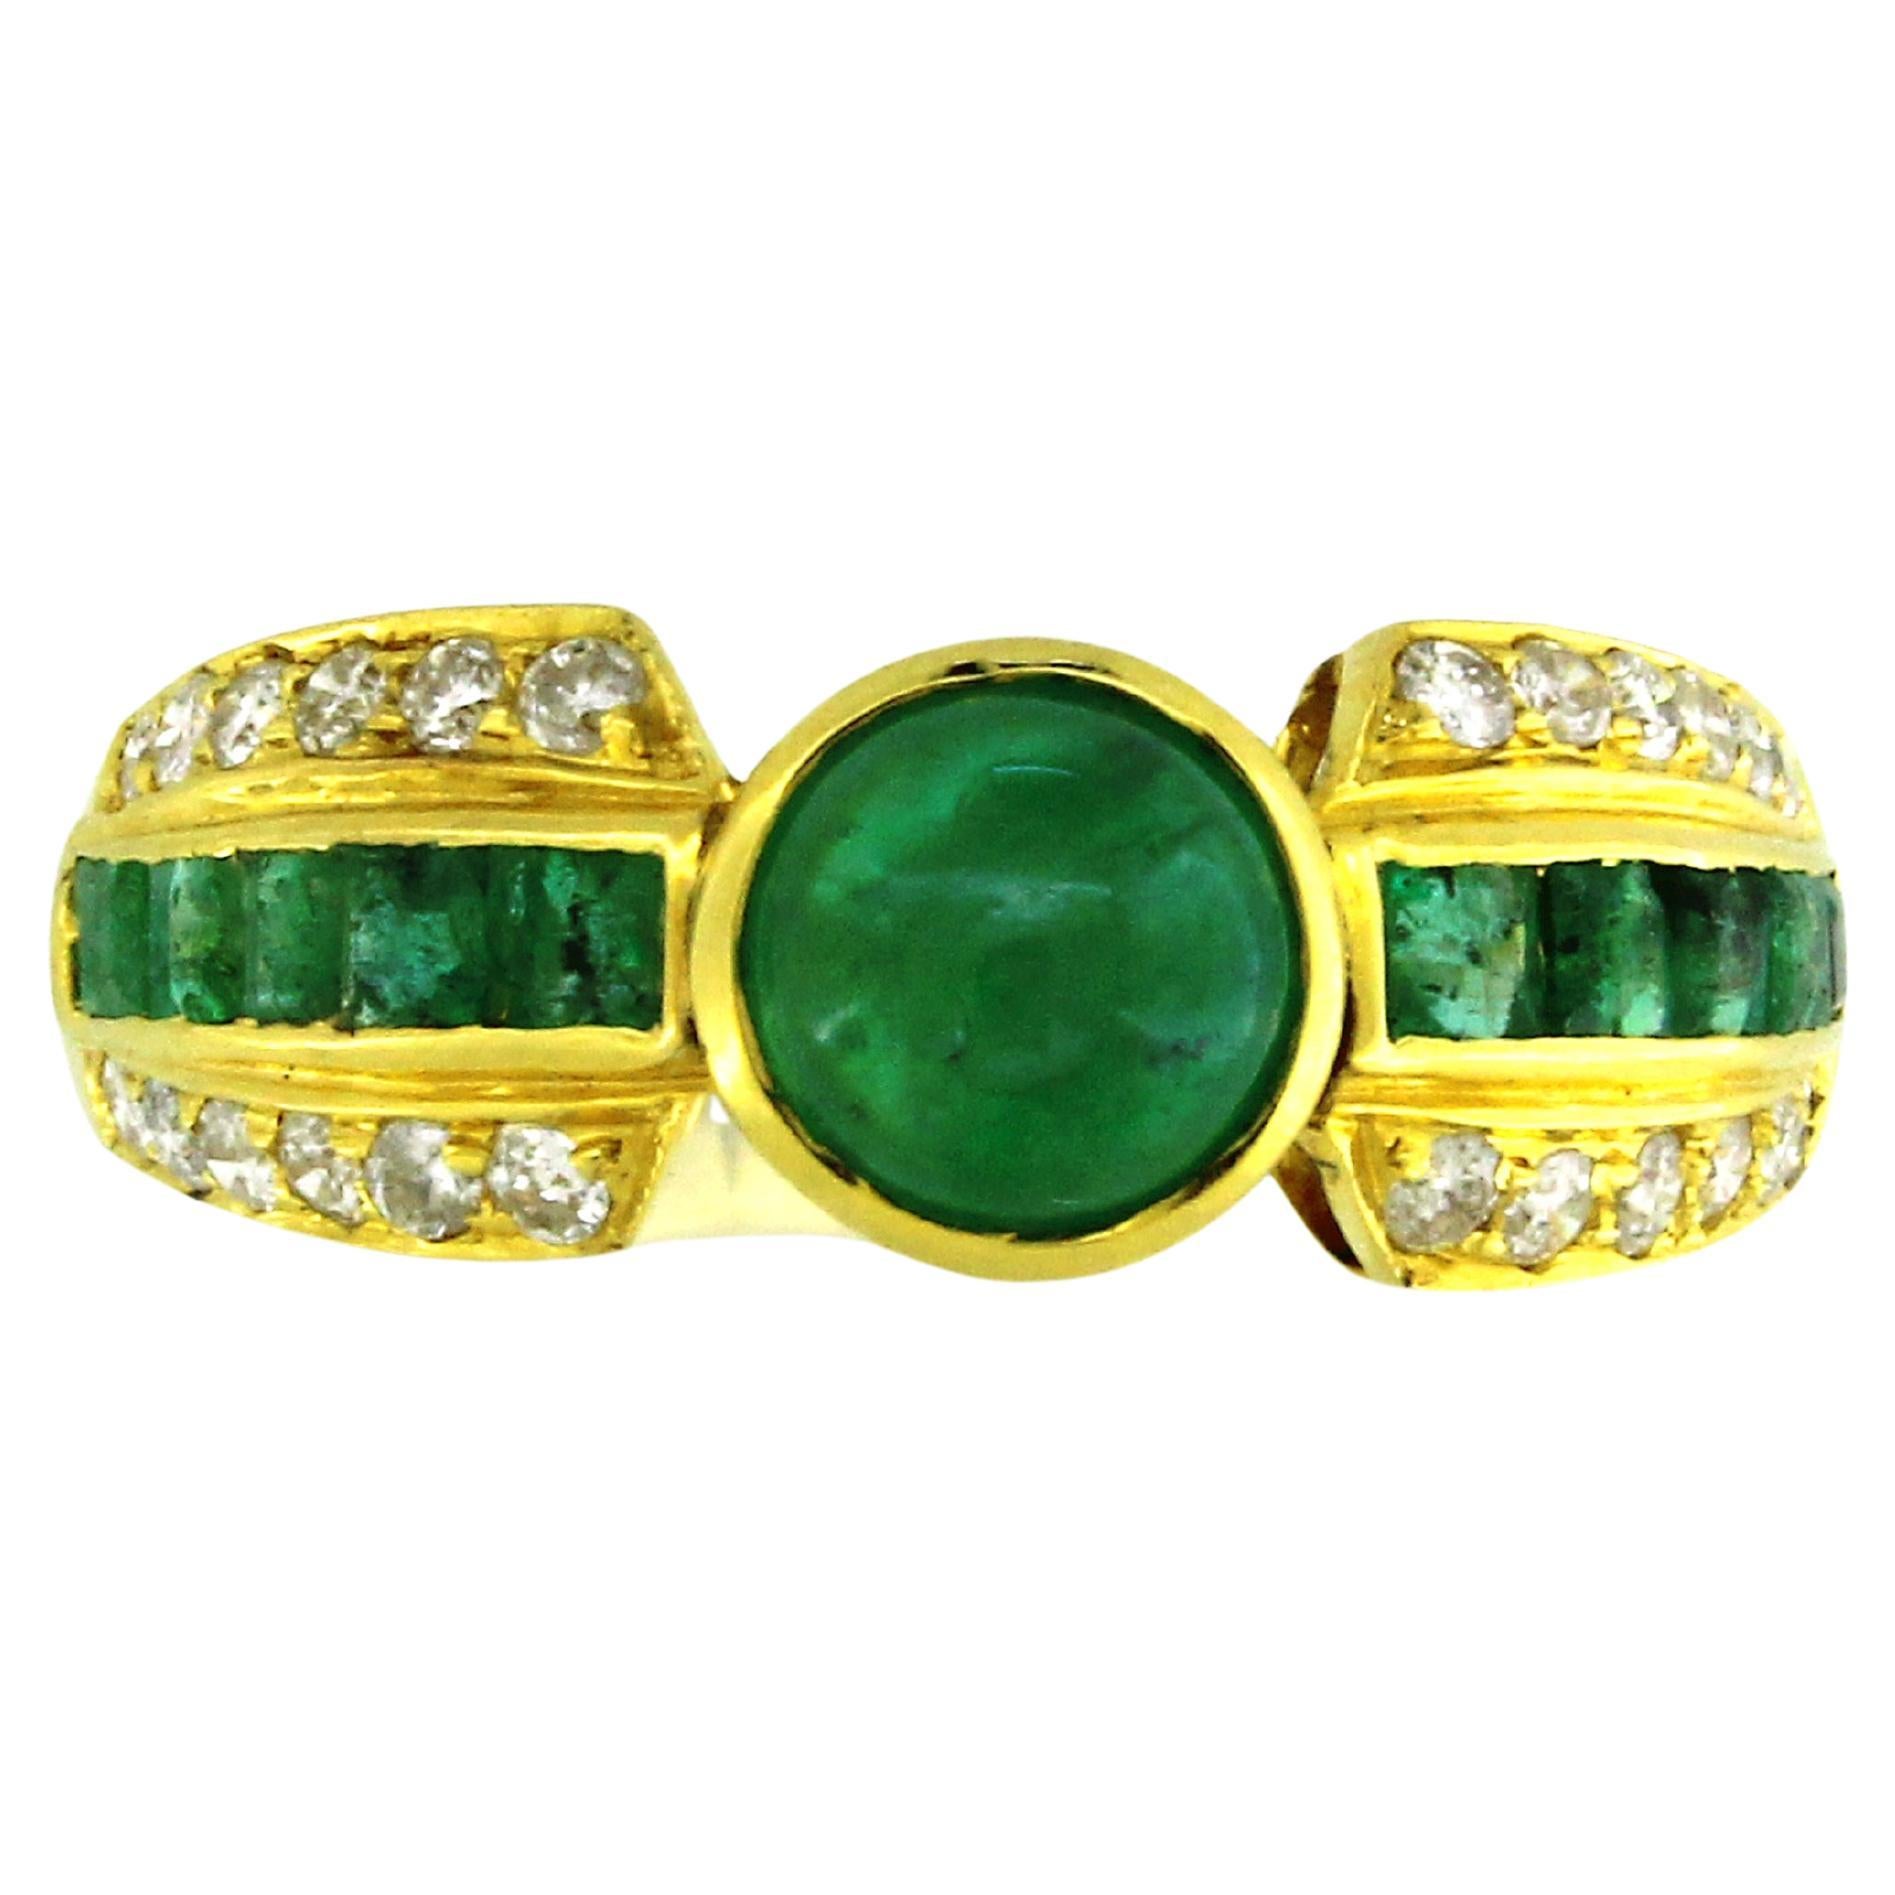 1.58 carats of Emerald Ring For Sale